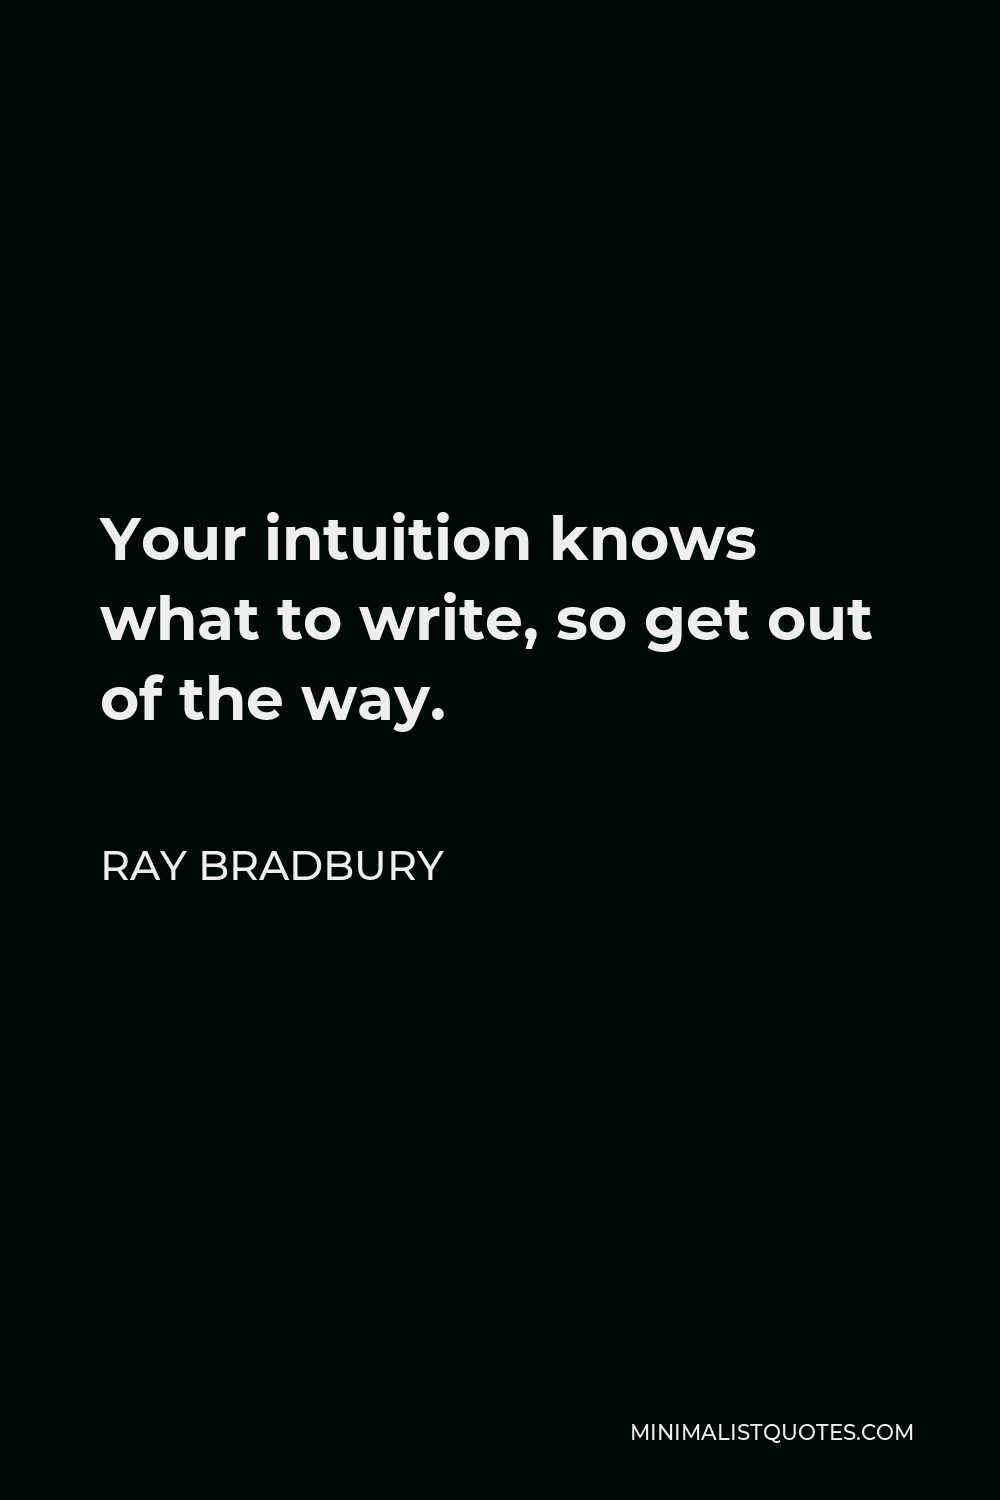 Ray Bradbury Quote - Your intuition knows what to write, so get out of the way.